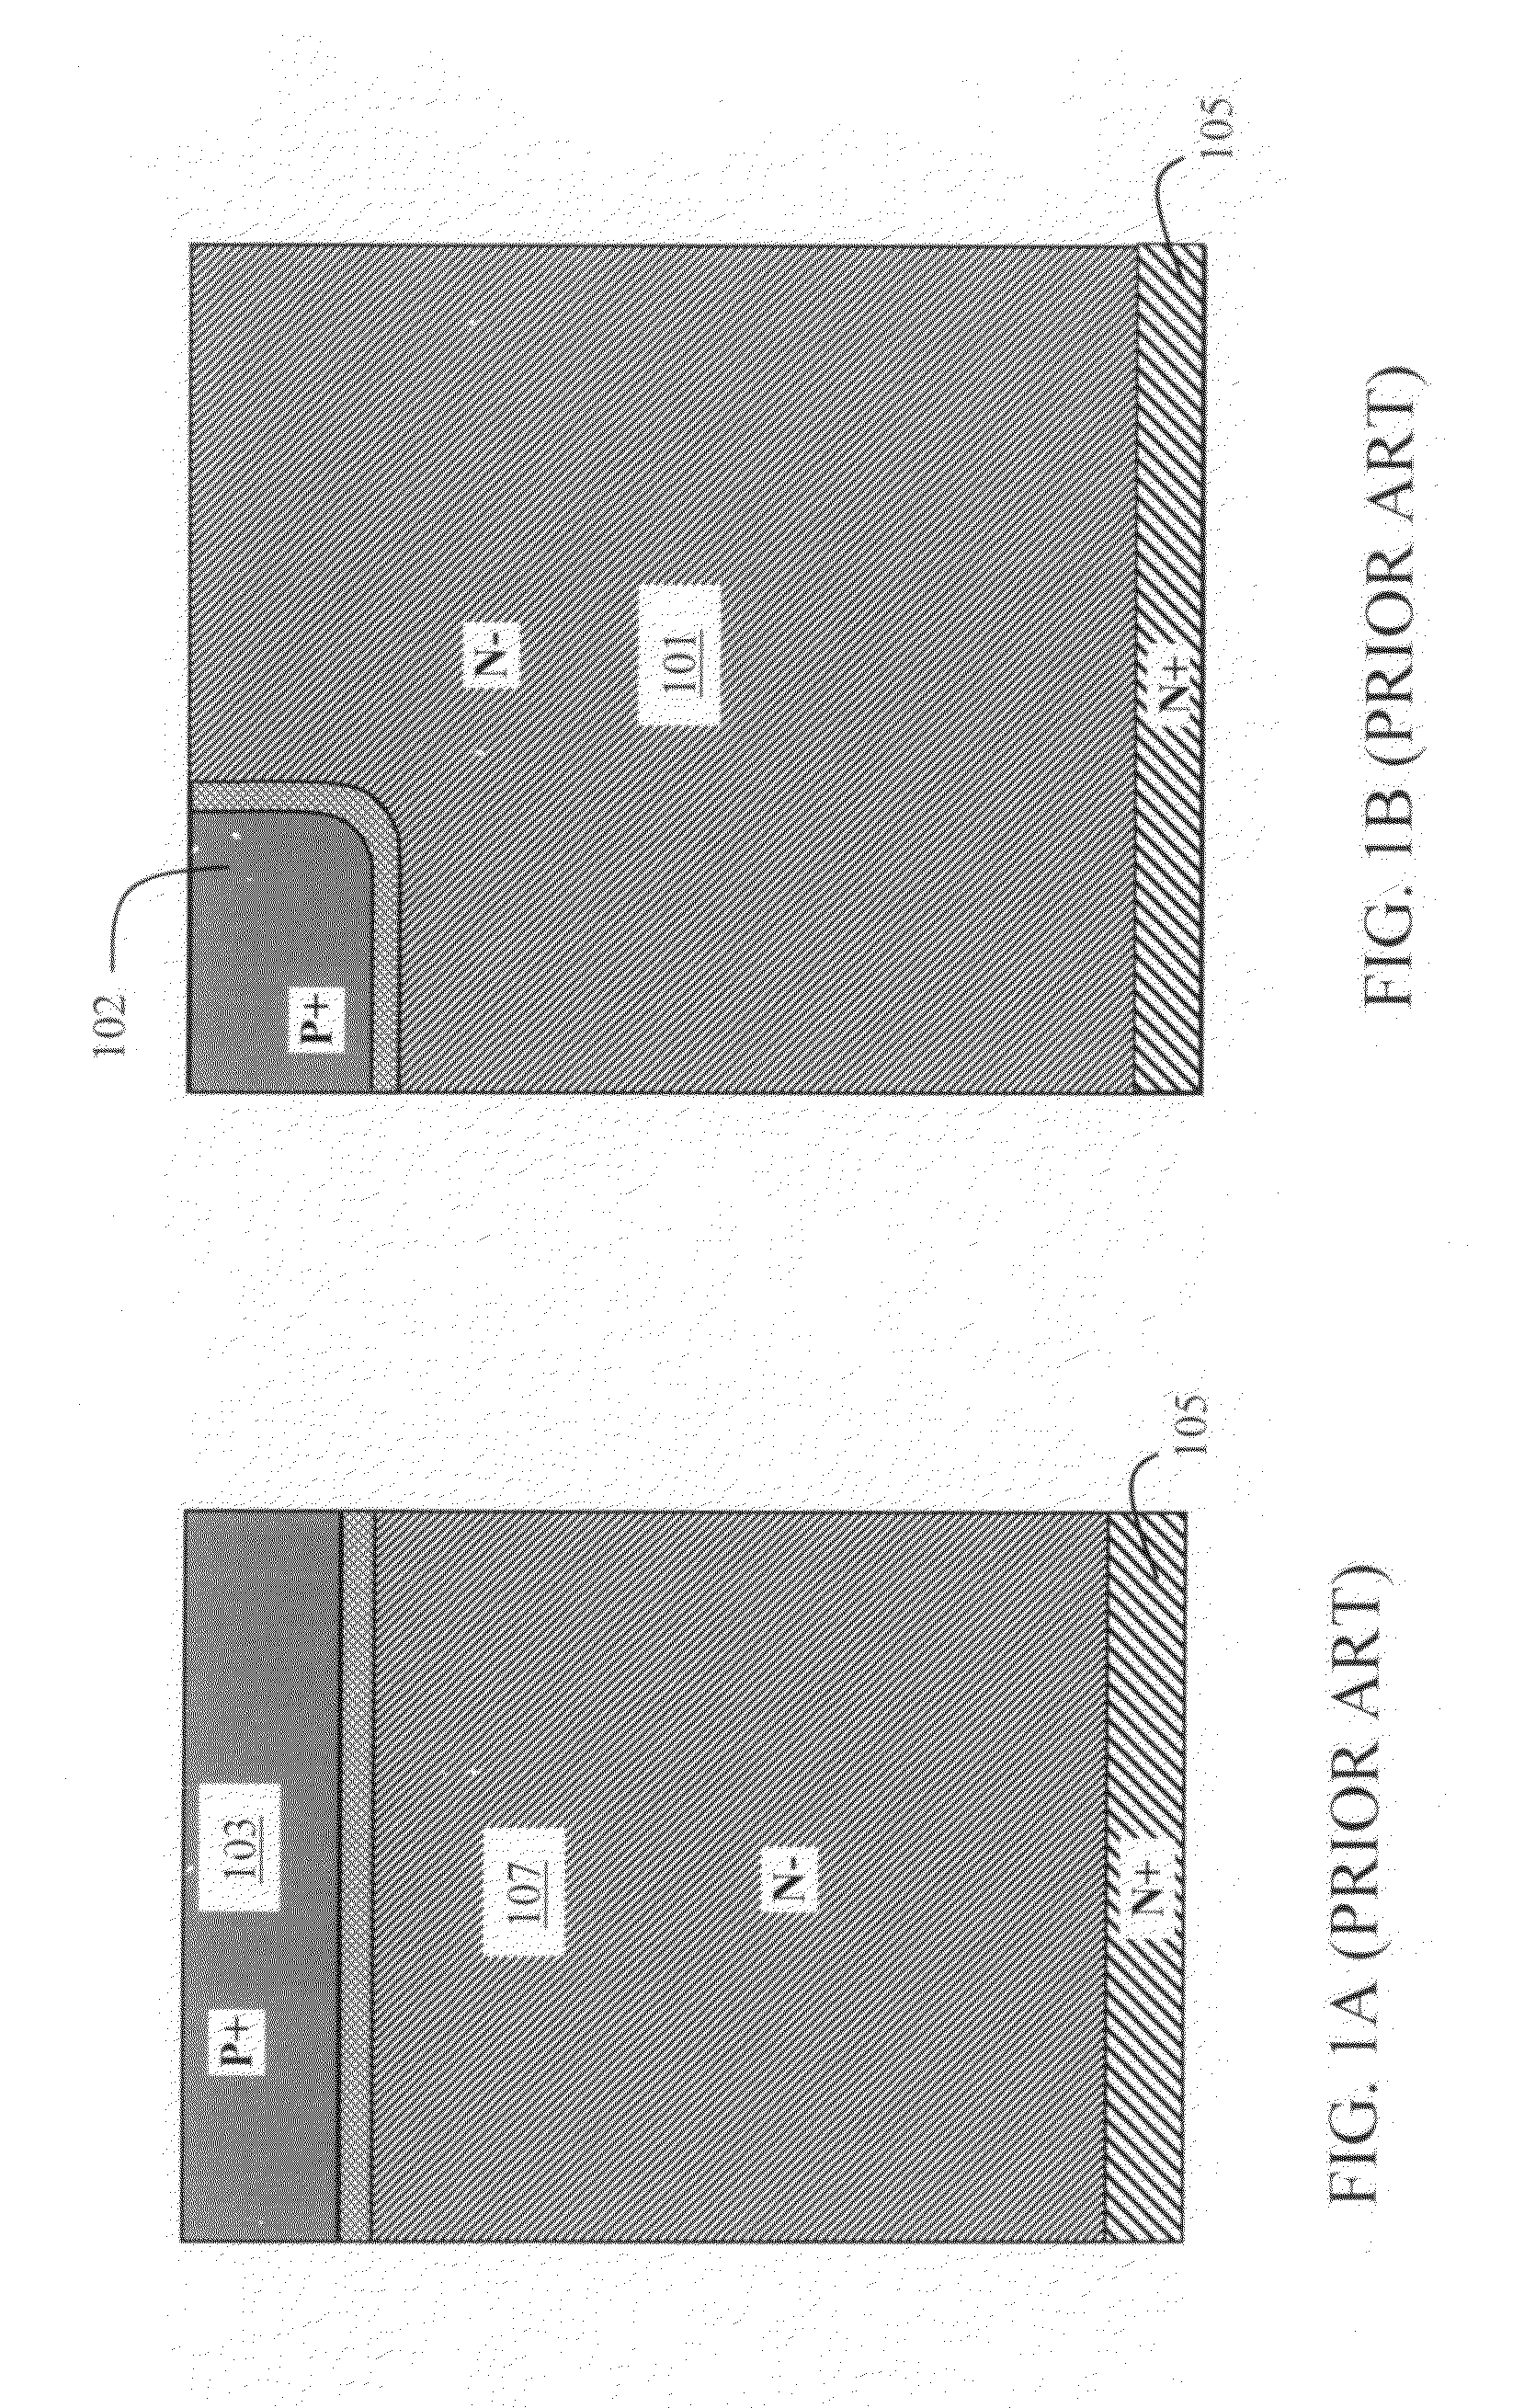 Edge termination configurations for high voltage semiconductor power devices